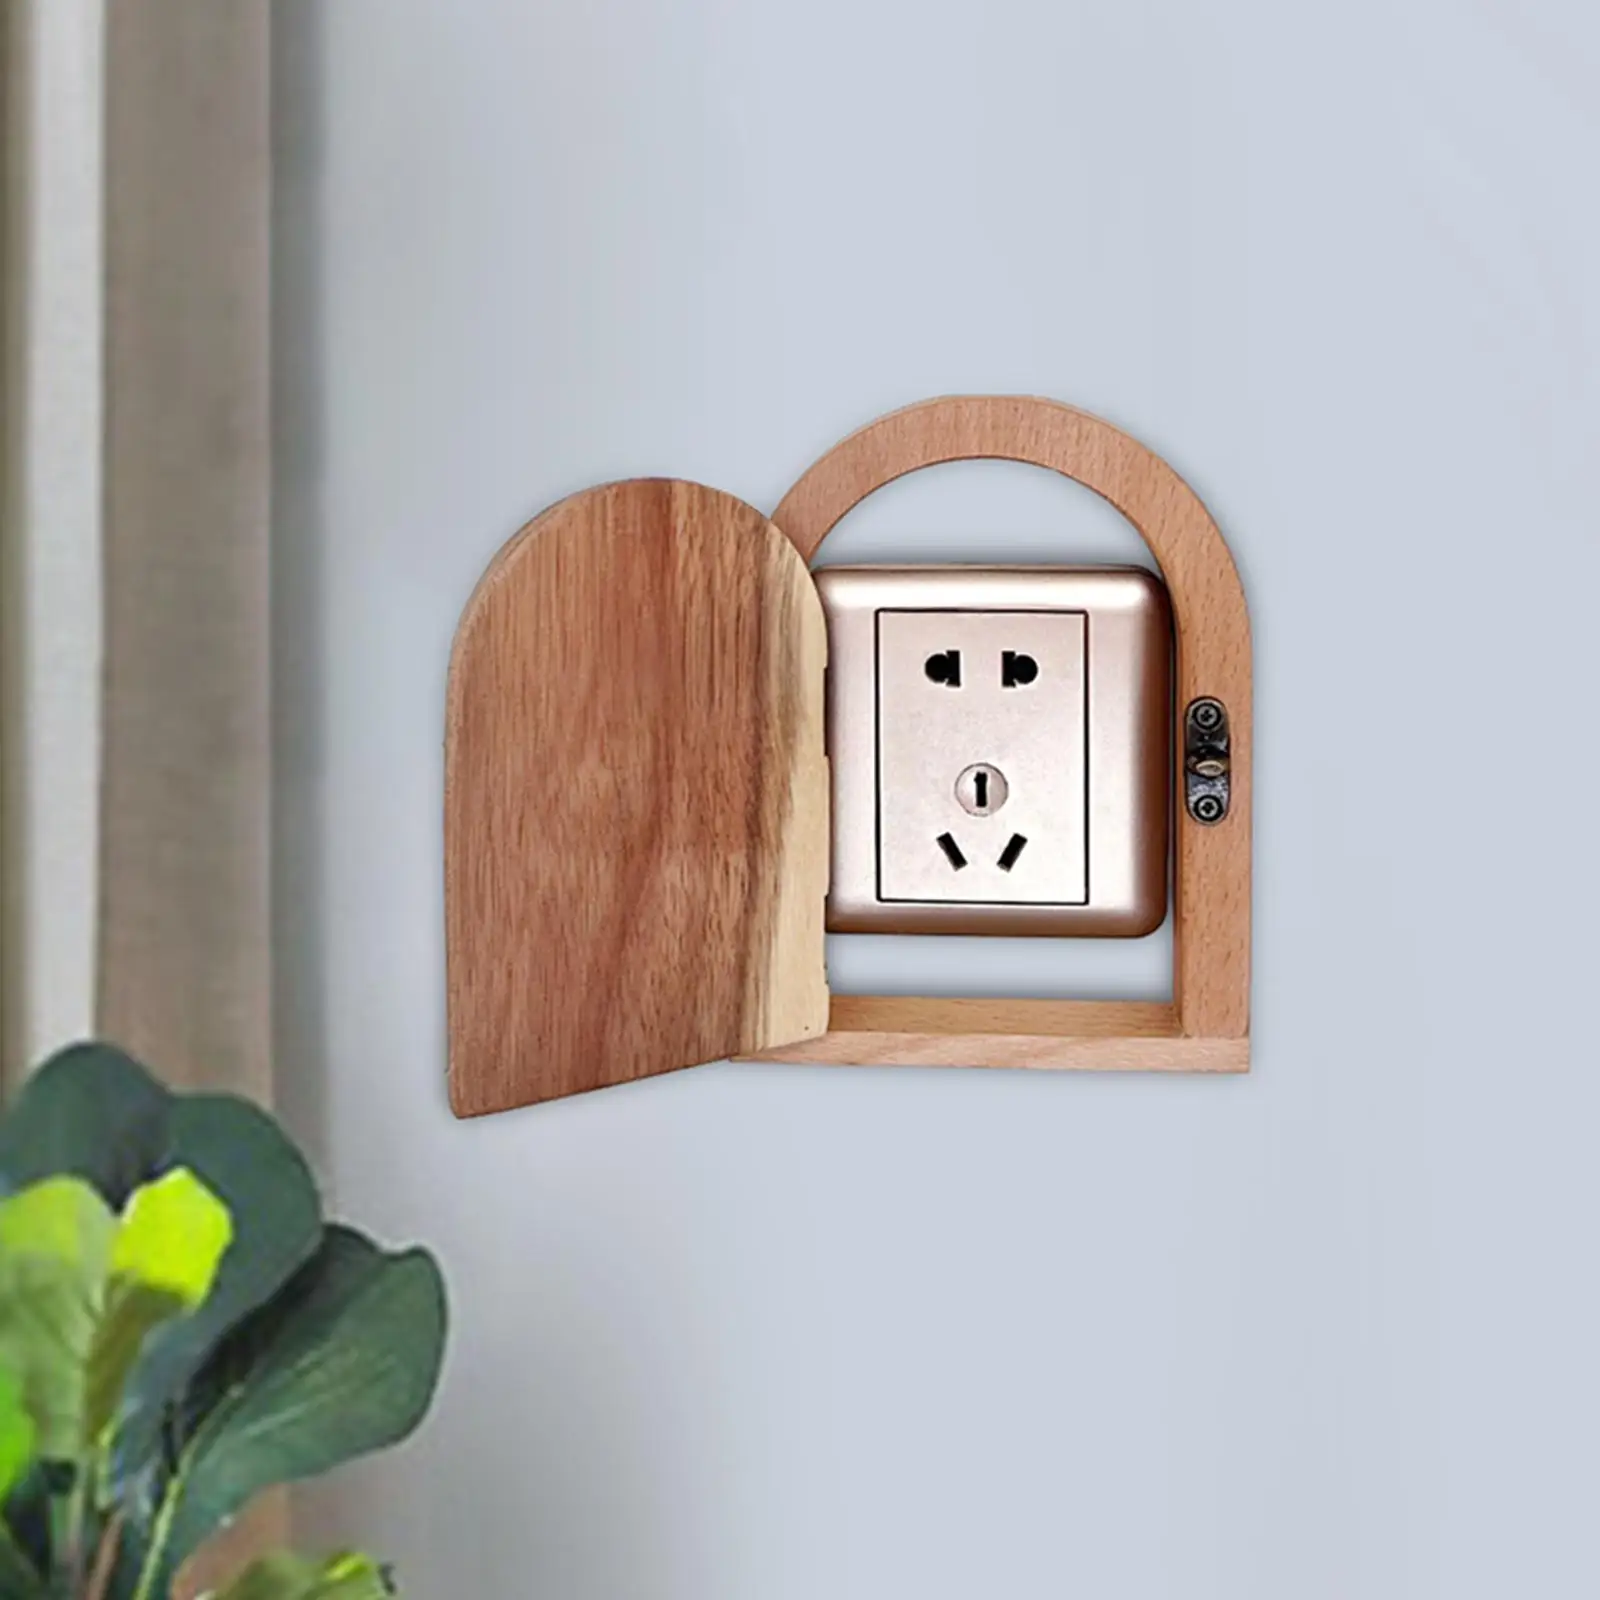 Outlet Covers Wood Wall Socket Box Dustproof Switch Cover Socket Protectors Outlet Box for Office Home Restaurant Wall Workshop